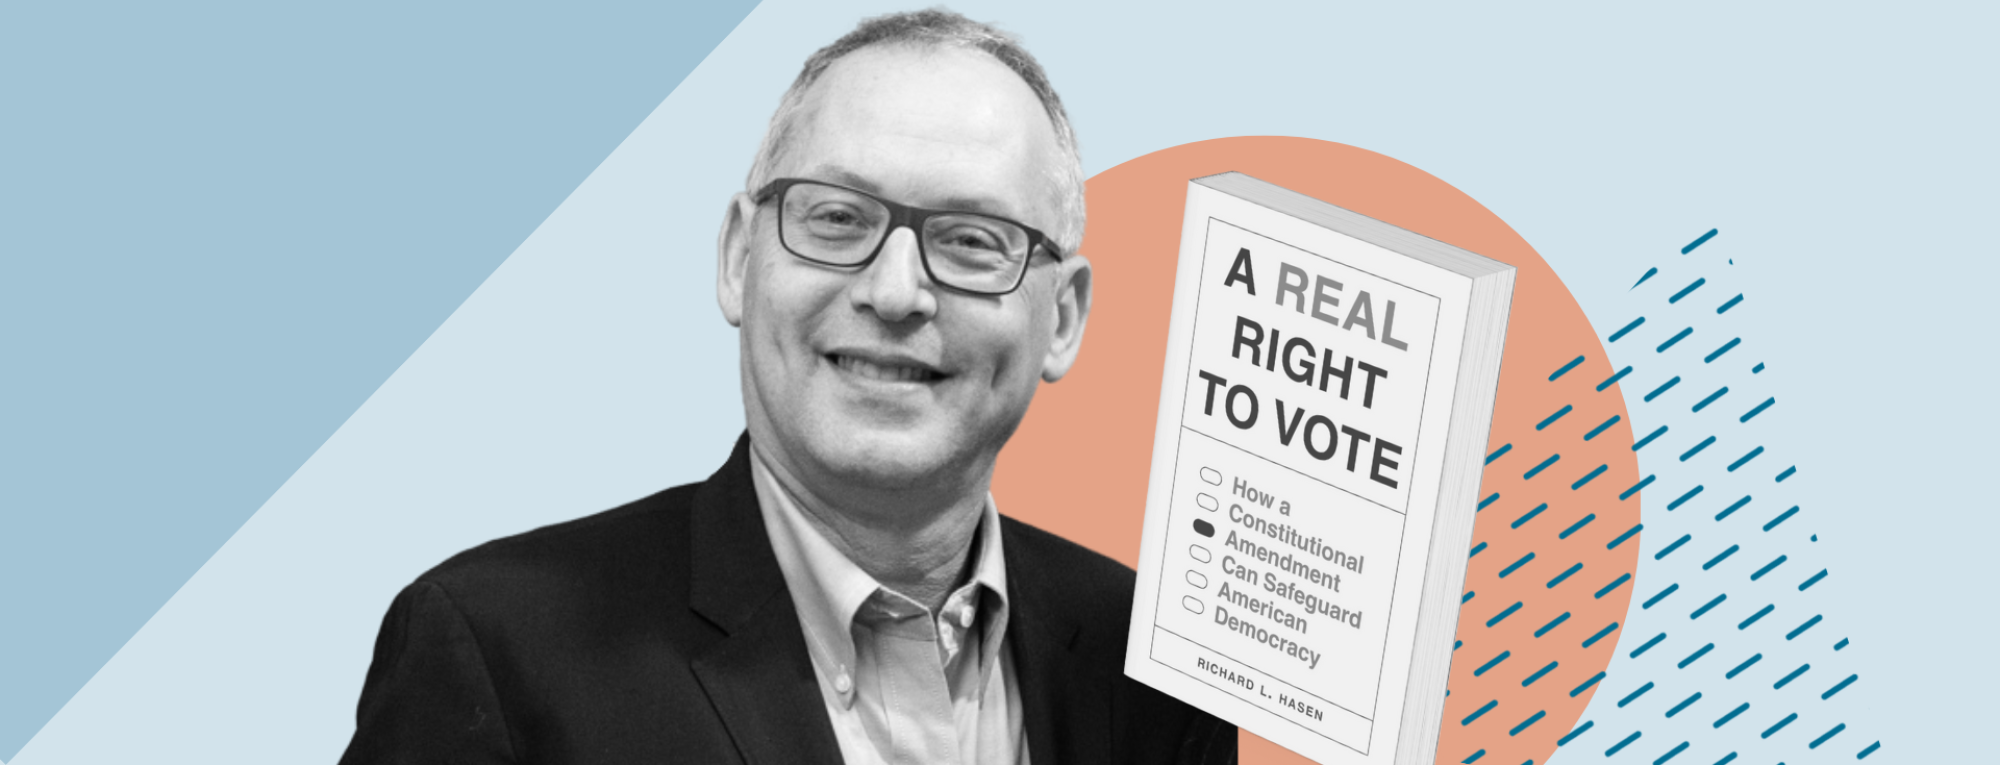 A Real Right to Vote: A Conversation with Rick Hasen